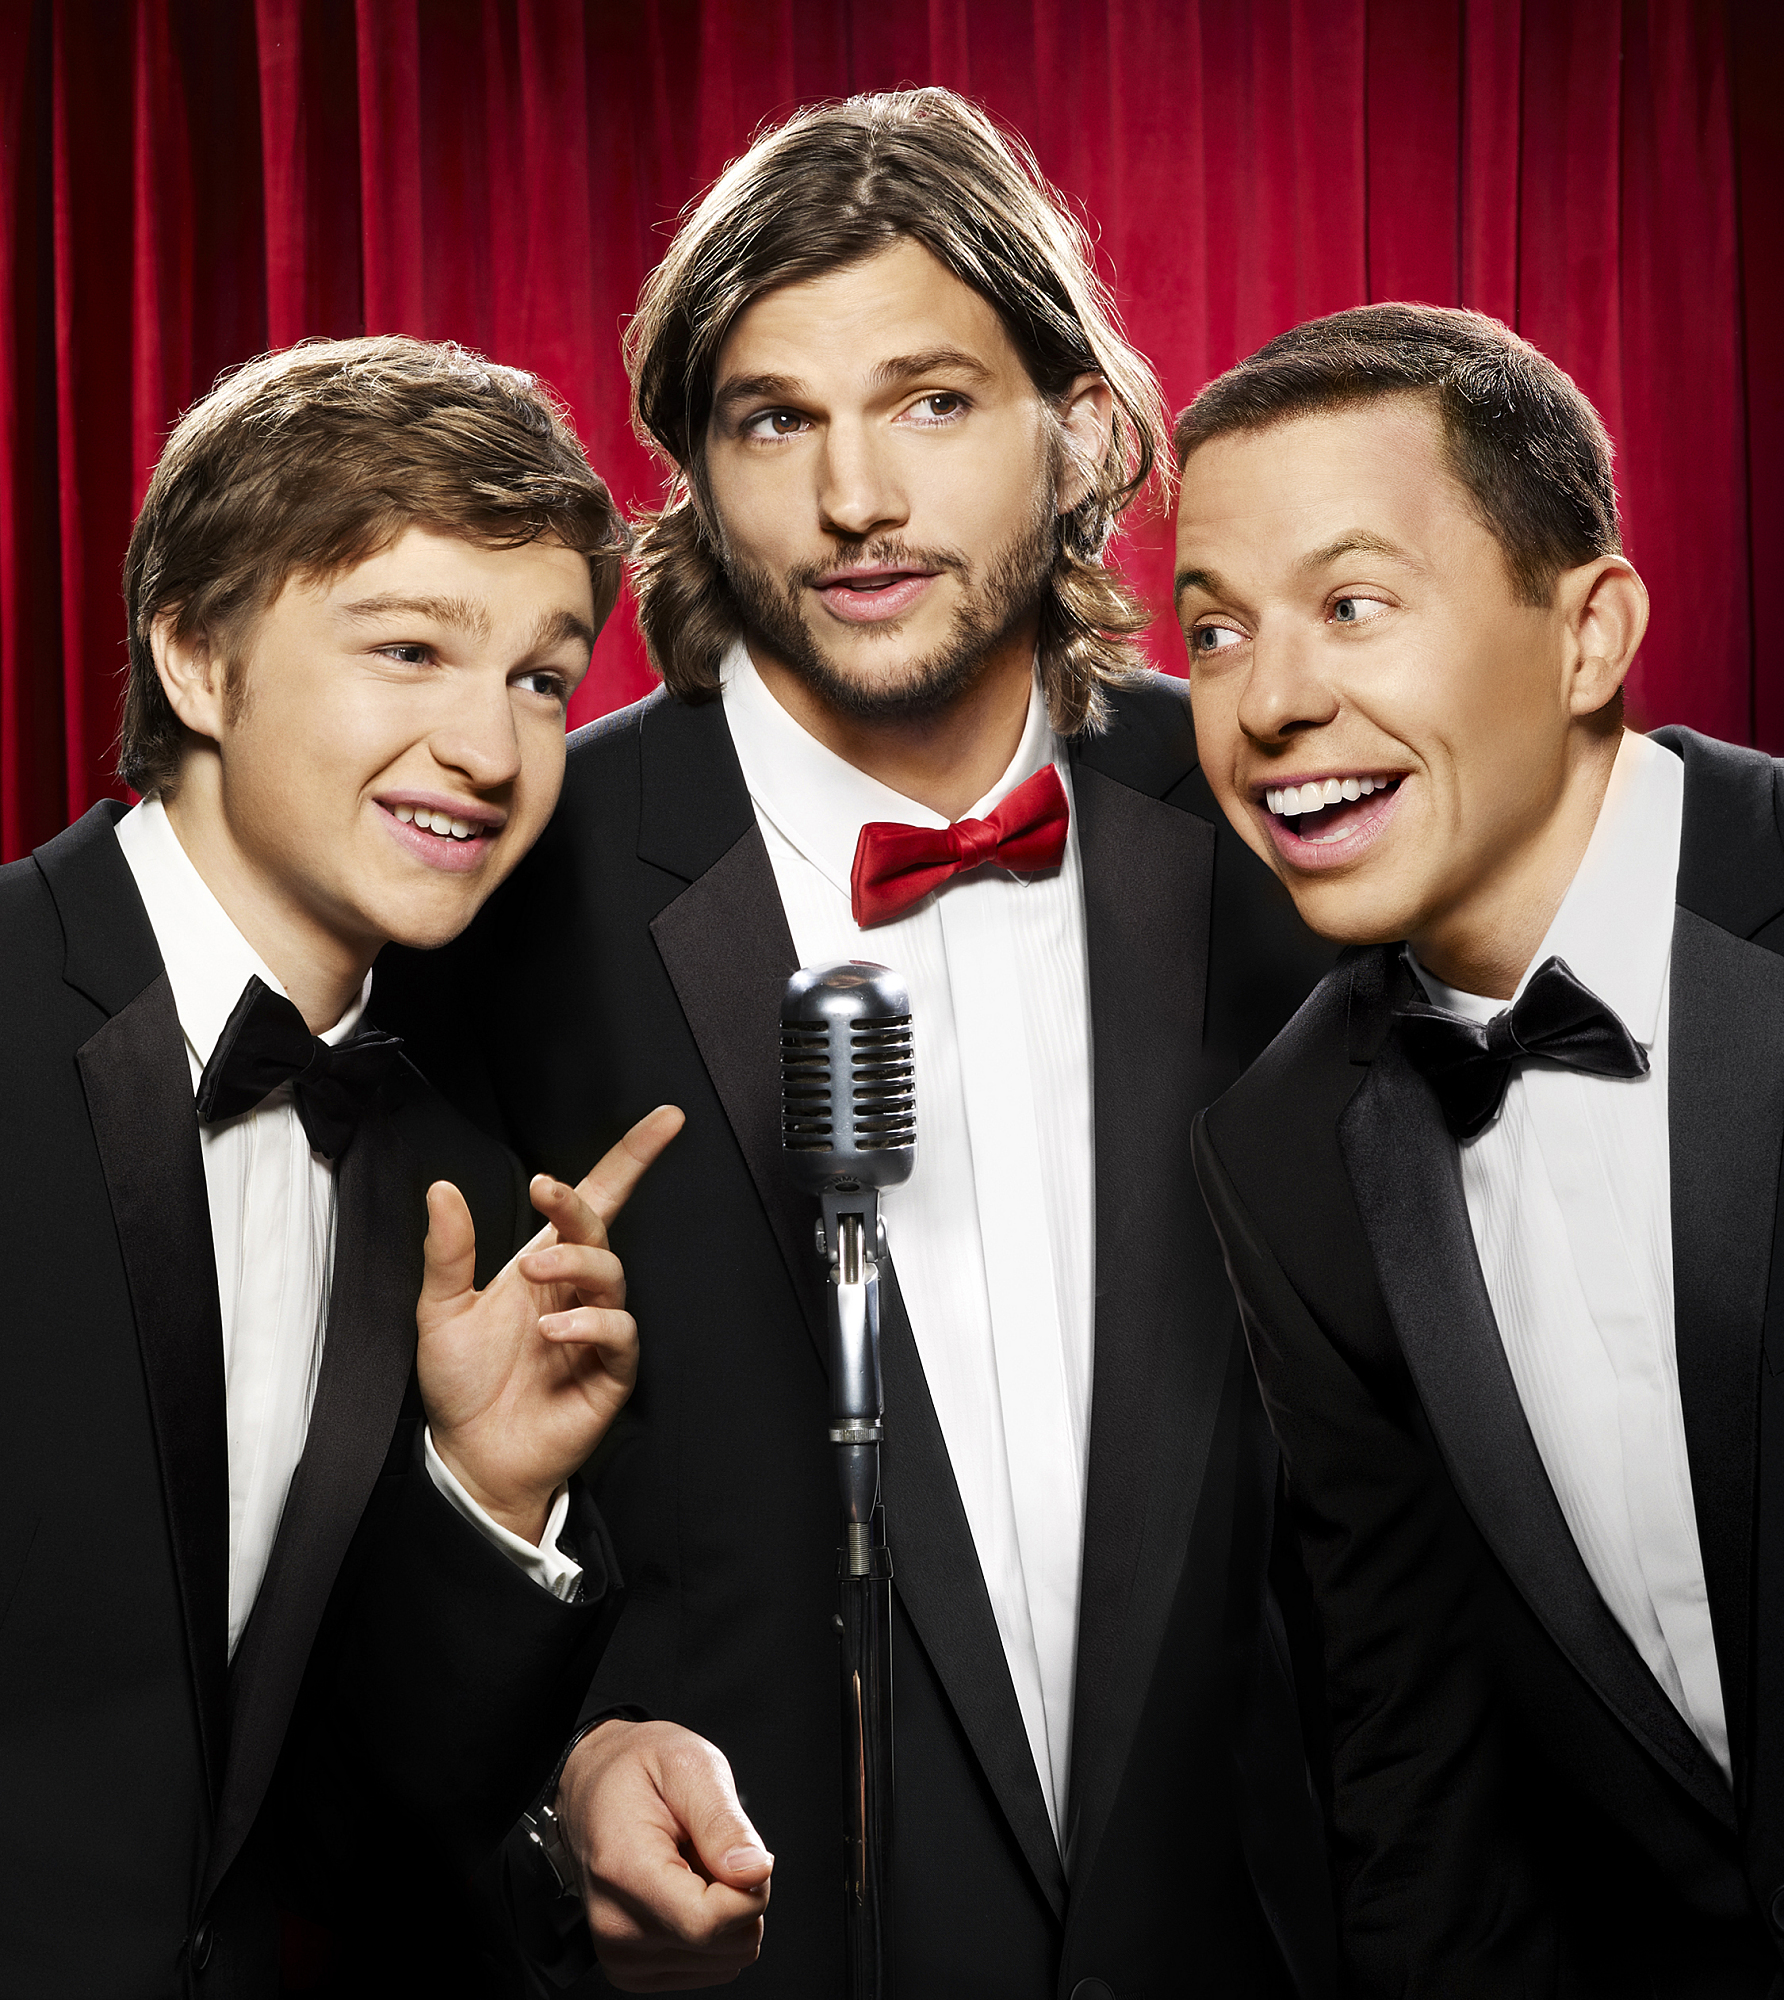 Angus T. Jones, Ashton Kutcher and Jon Cryer on "Two and a Half Men," in 2011 | Source: Getty Images